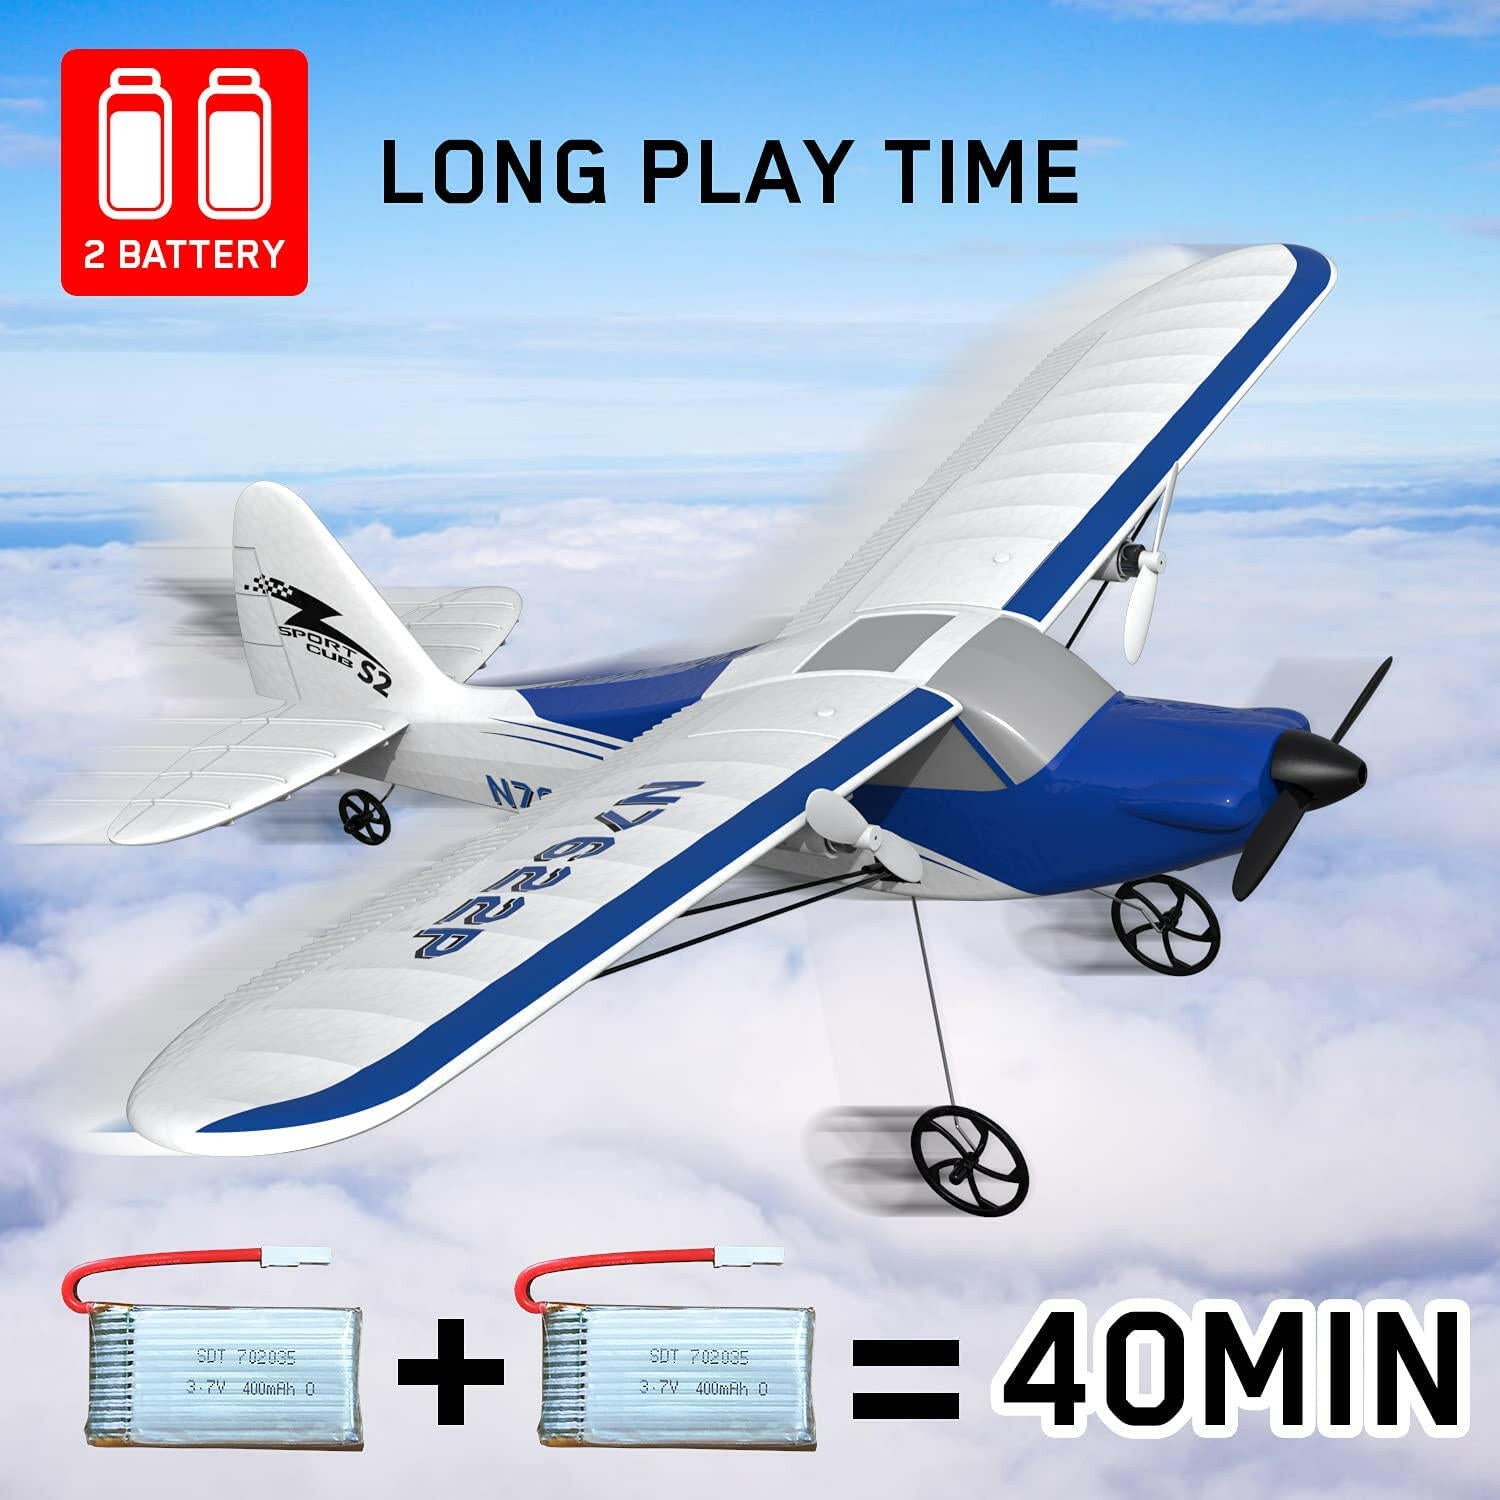 VOLANTEXRC Sport Cub S2 RC Plane with Gyro Stabilization System Ready to Fly for Beginners 2-CH Remote Control Airplane RTF (762-2) - EXHOBBY